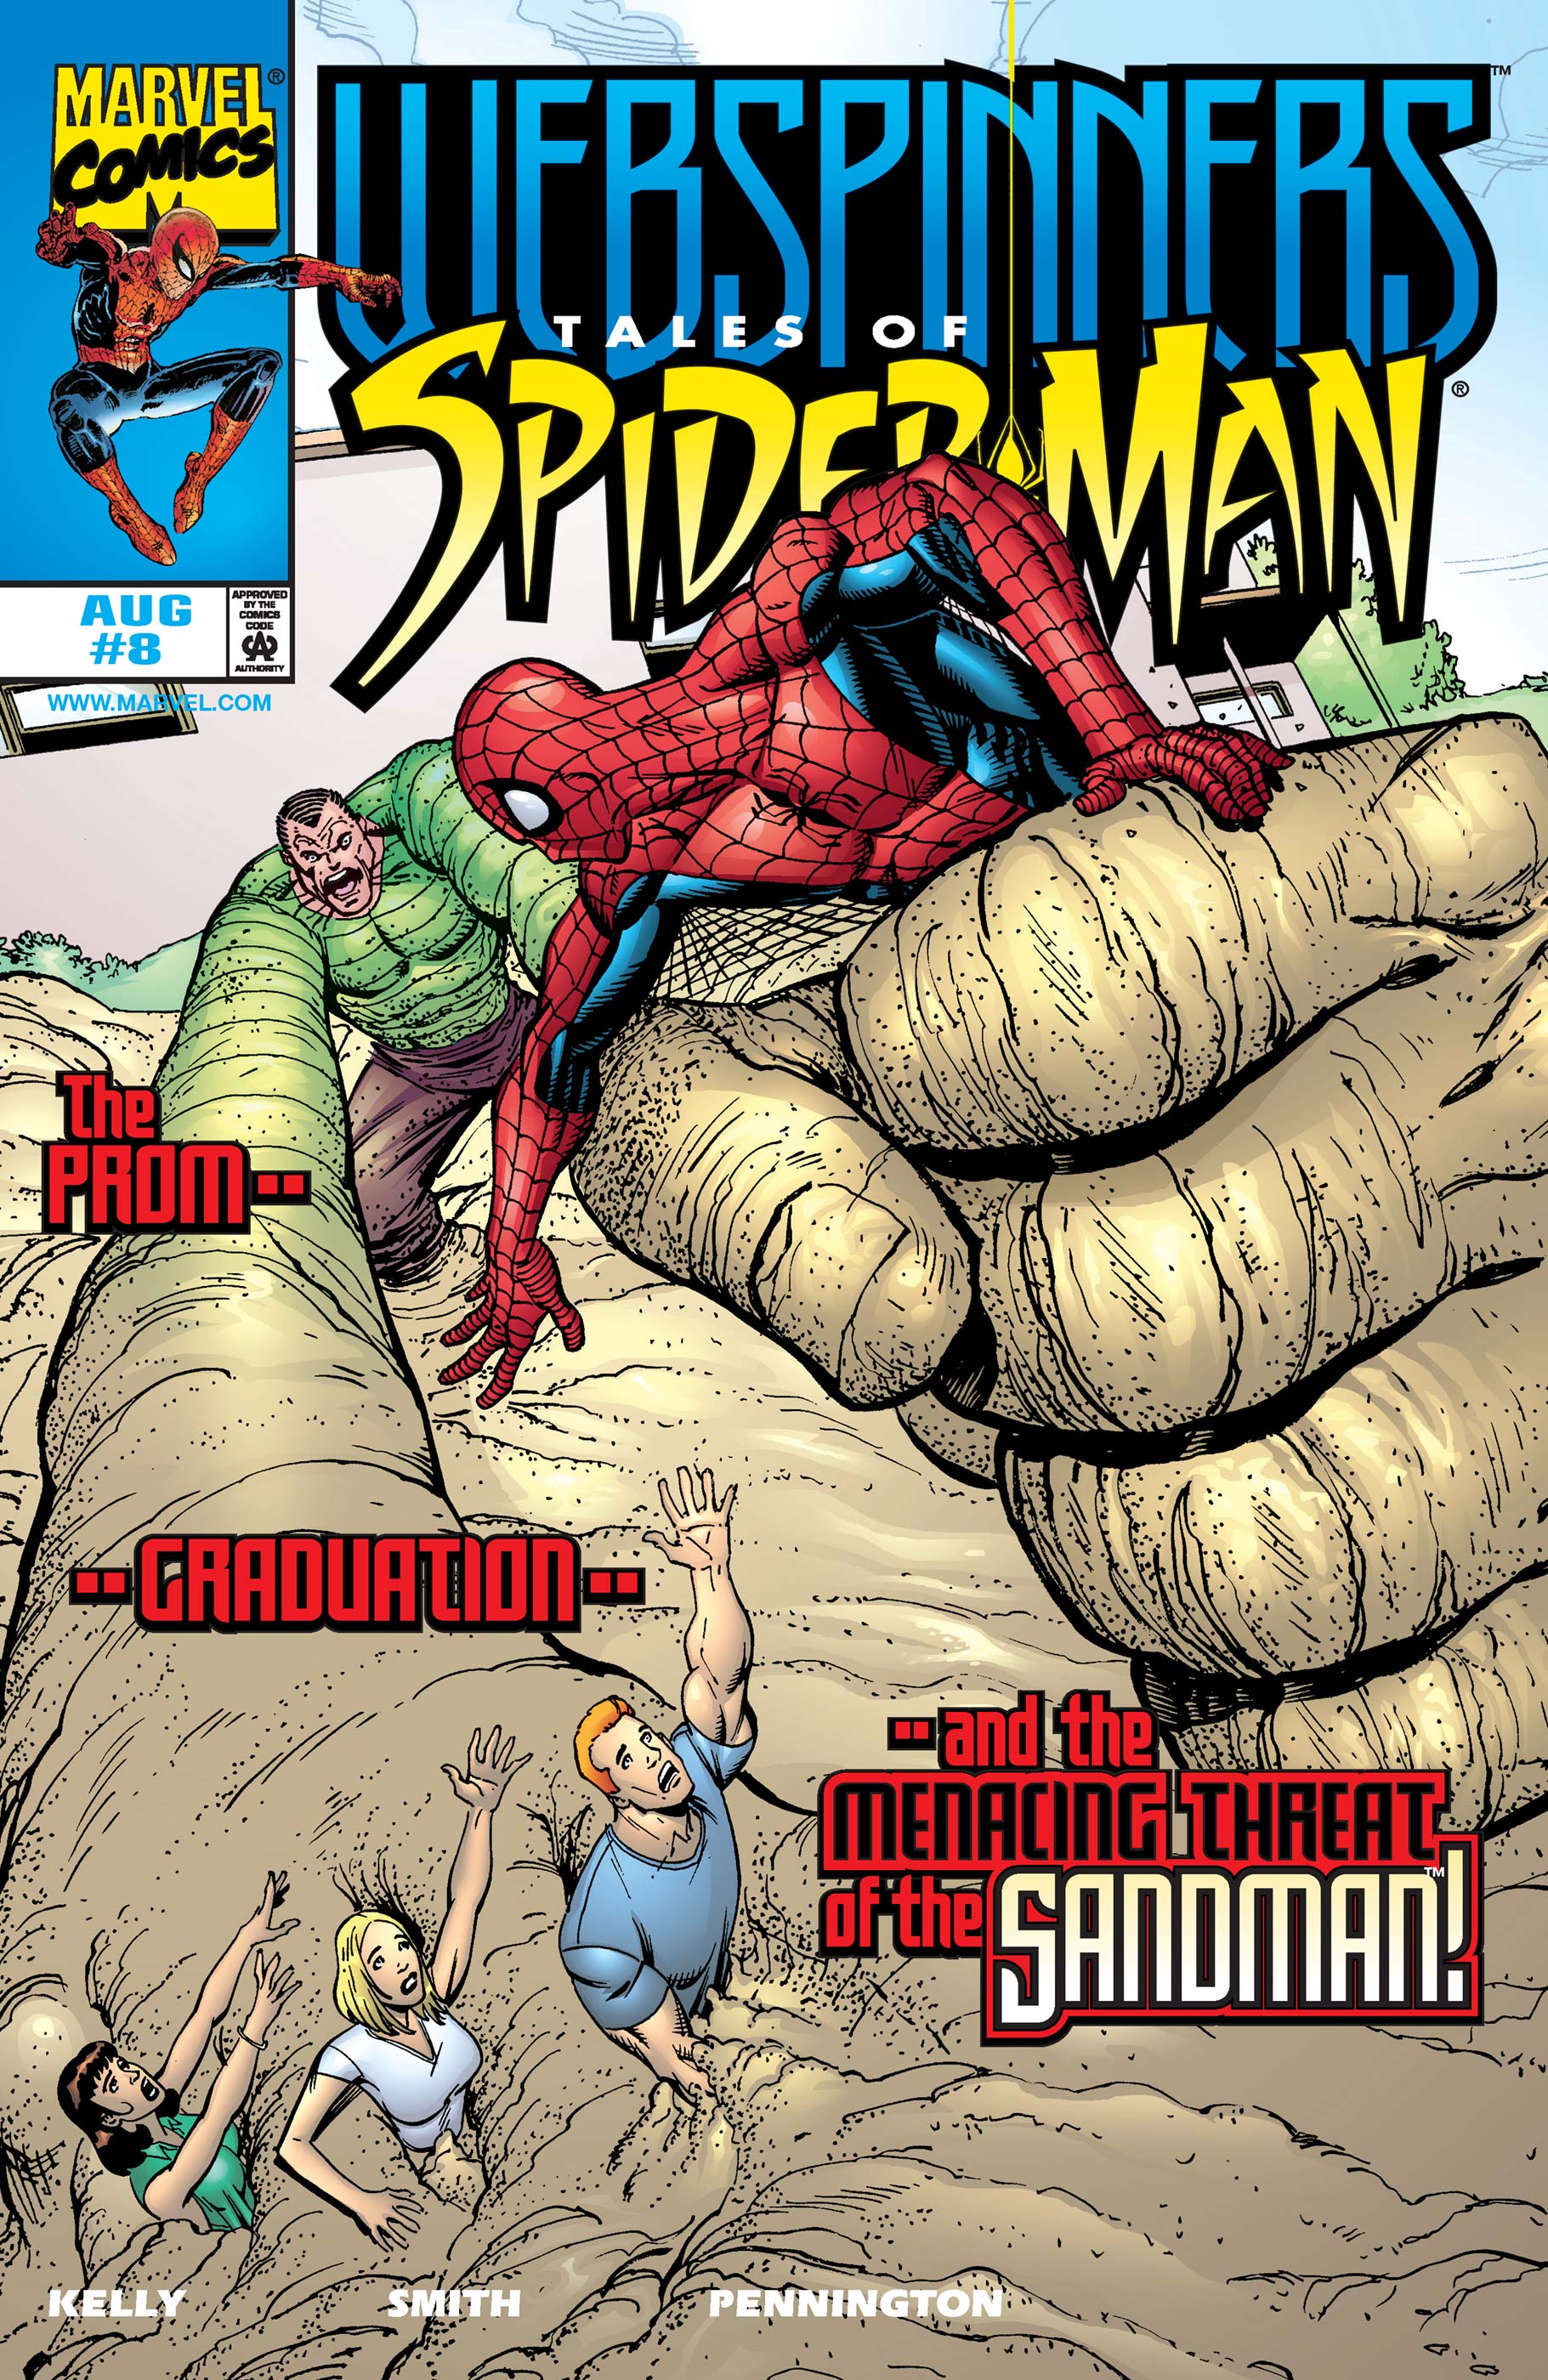 Webspinners: Tales of Spider-Man (1999) #8